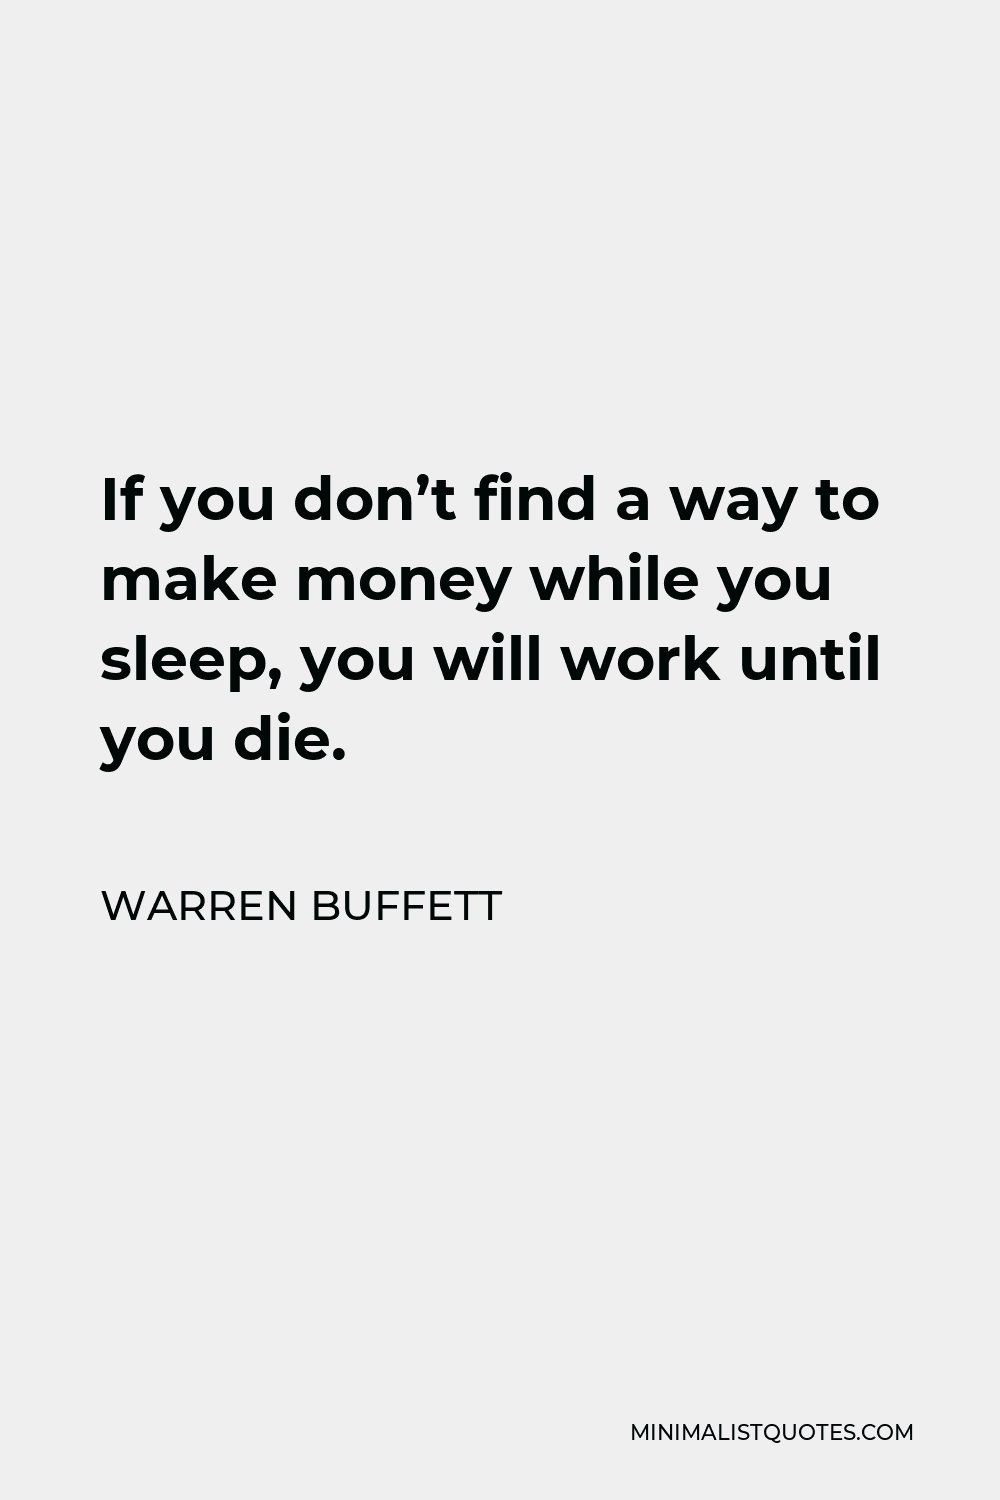 Warren Buffett Quote - If you don’t find a way to make money while you sleep, you will work until you die.